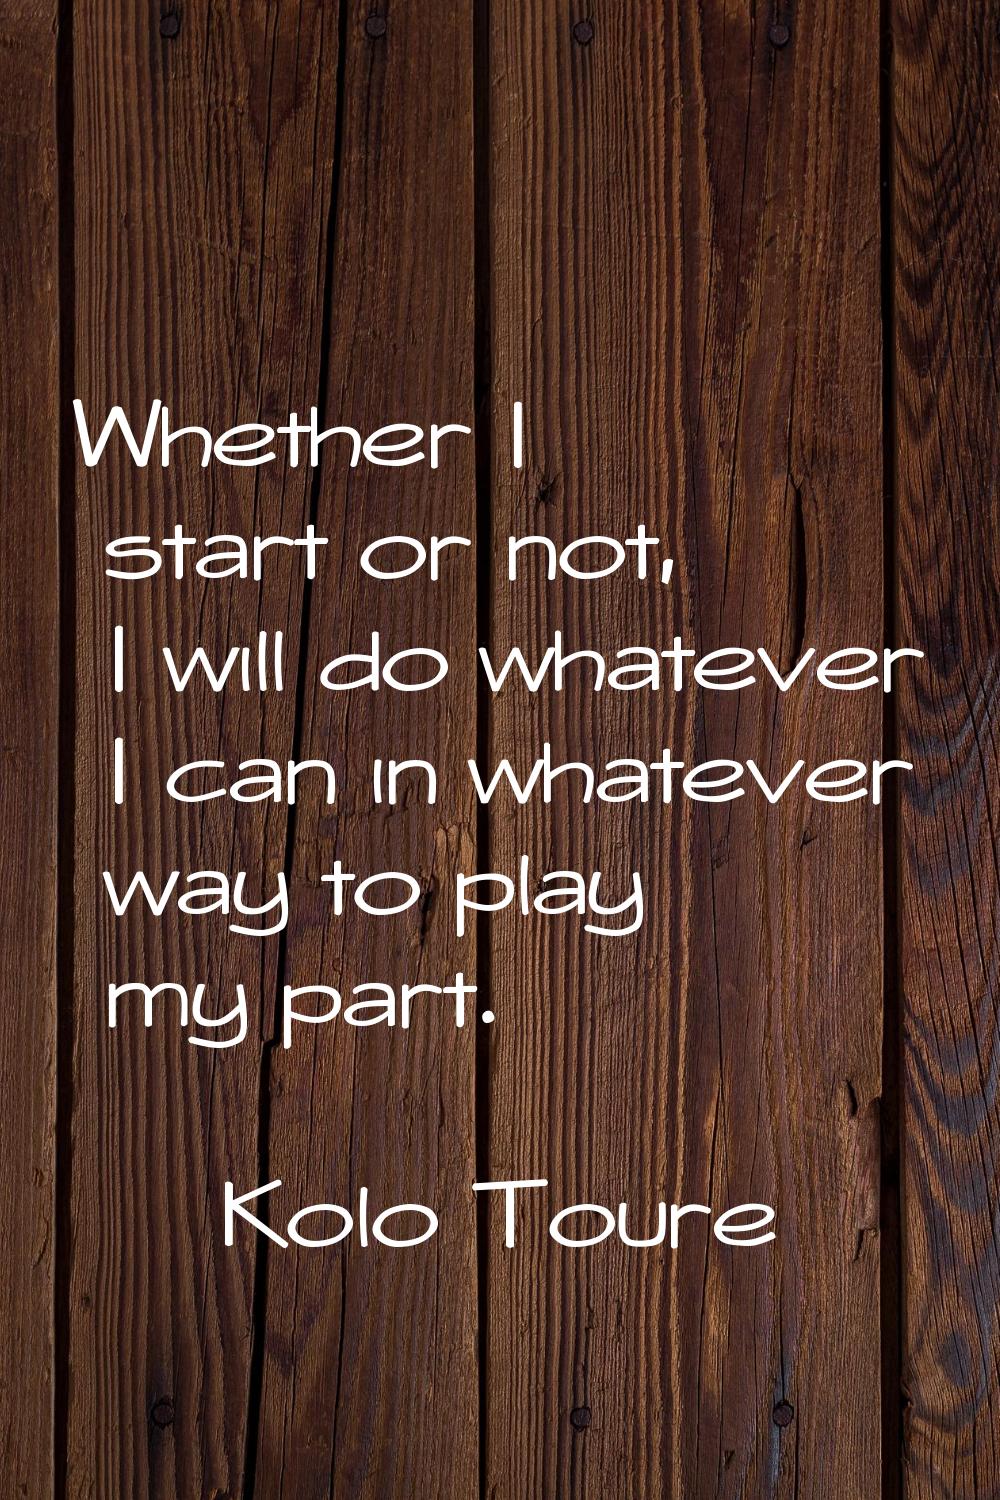 Whether I start or not, I will do whatever I can in whatever way to play my part.